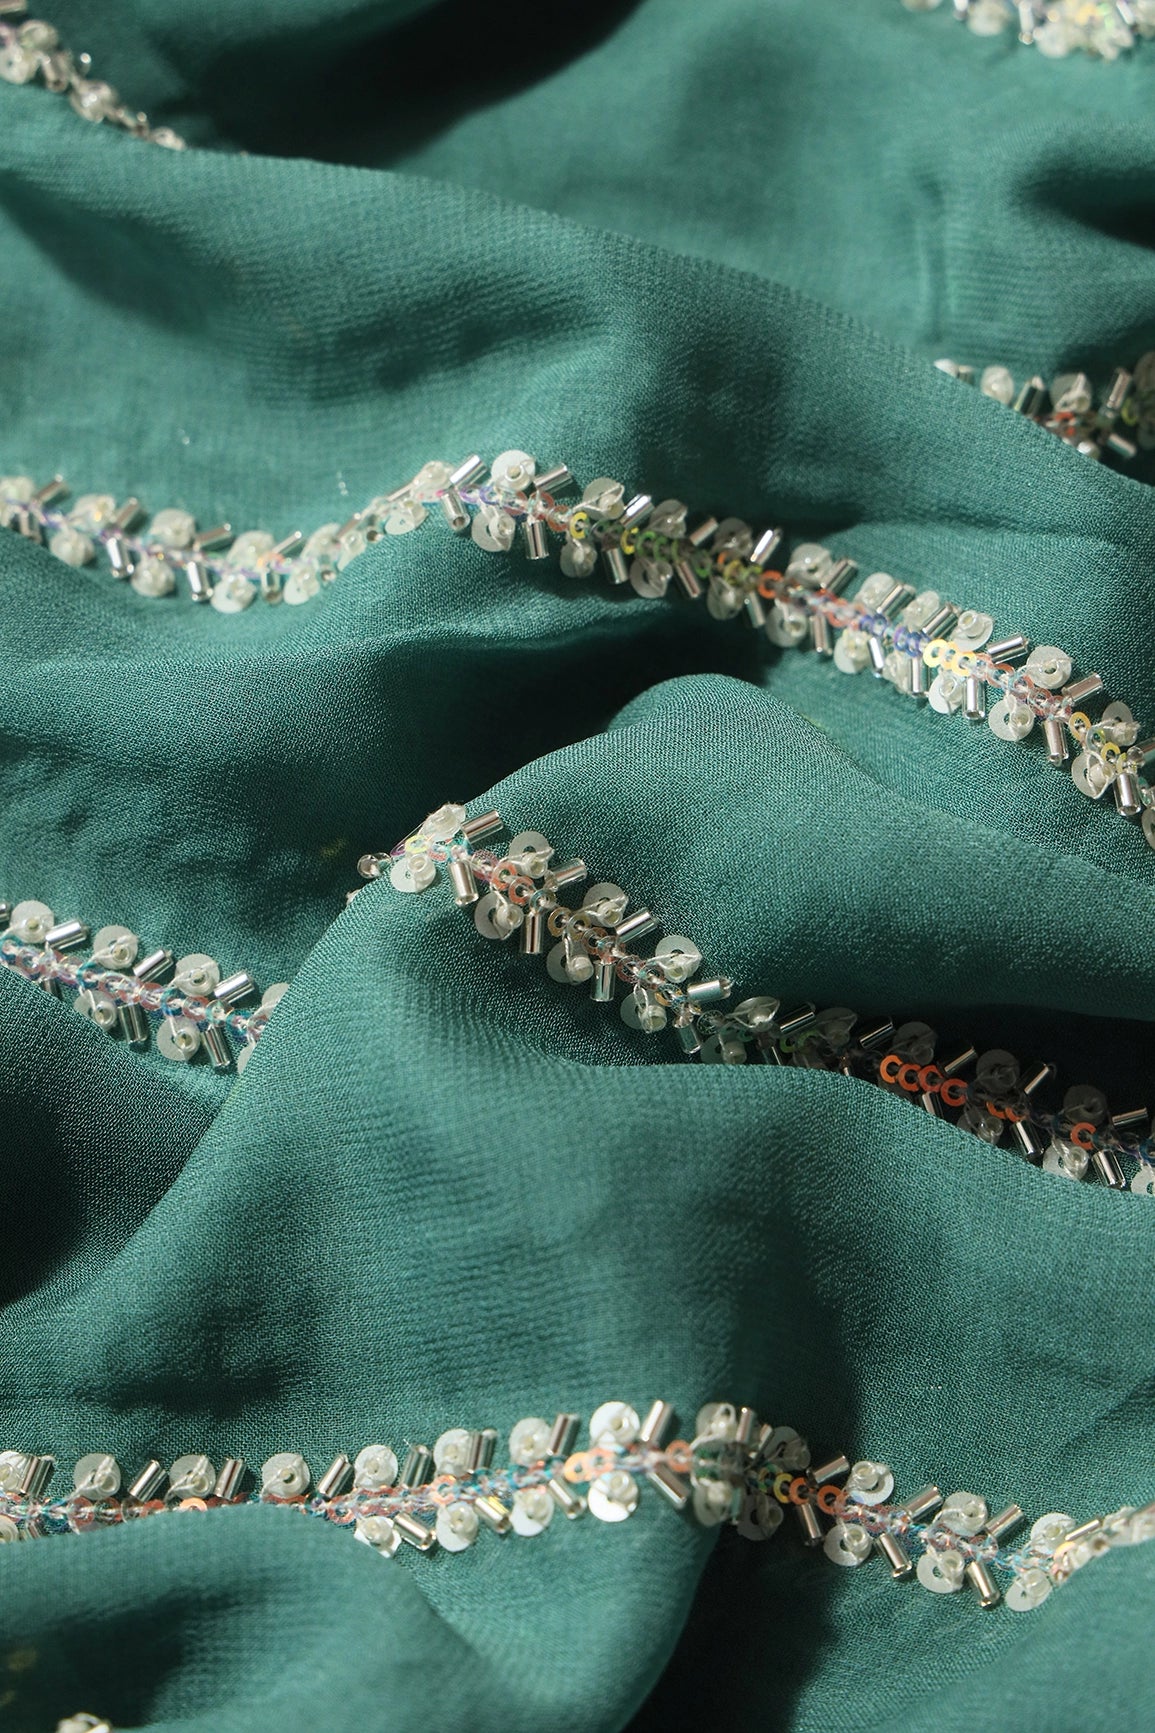 Silver Beads With Sequins Beautiful Stripes Handwork Embroidery On Teal Viscose Georgette Fabric